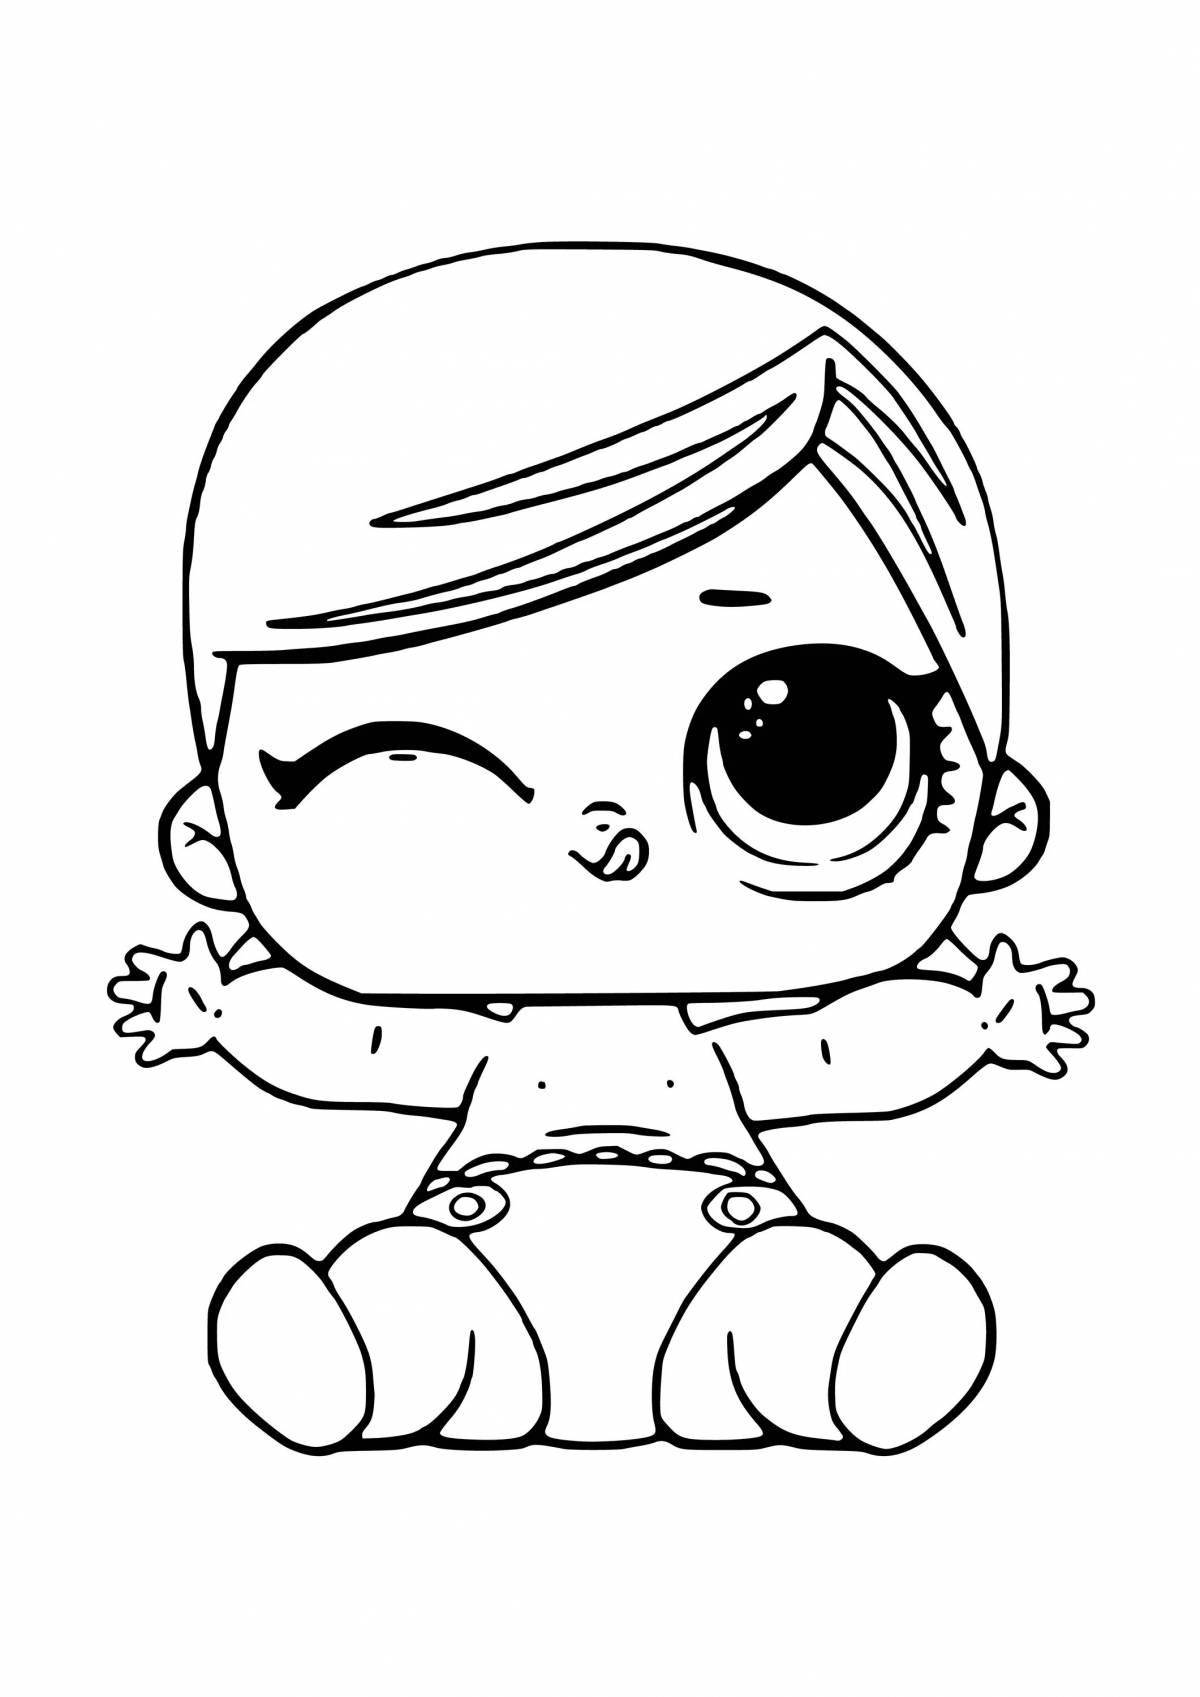 Playtime coloring page lol bunny doll